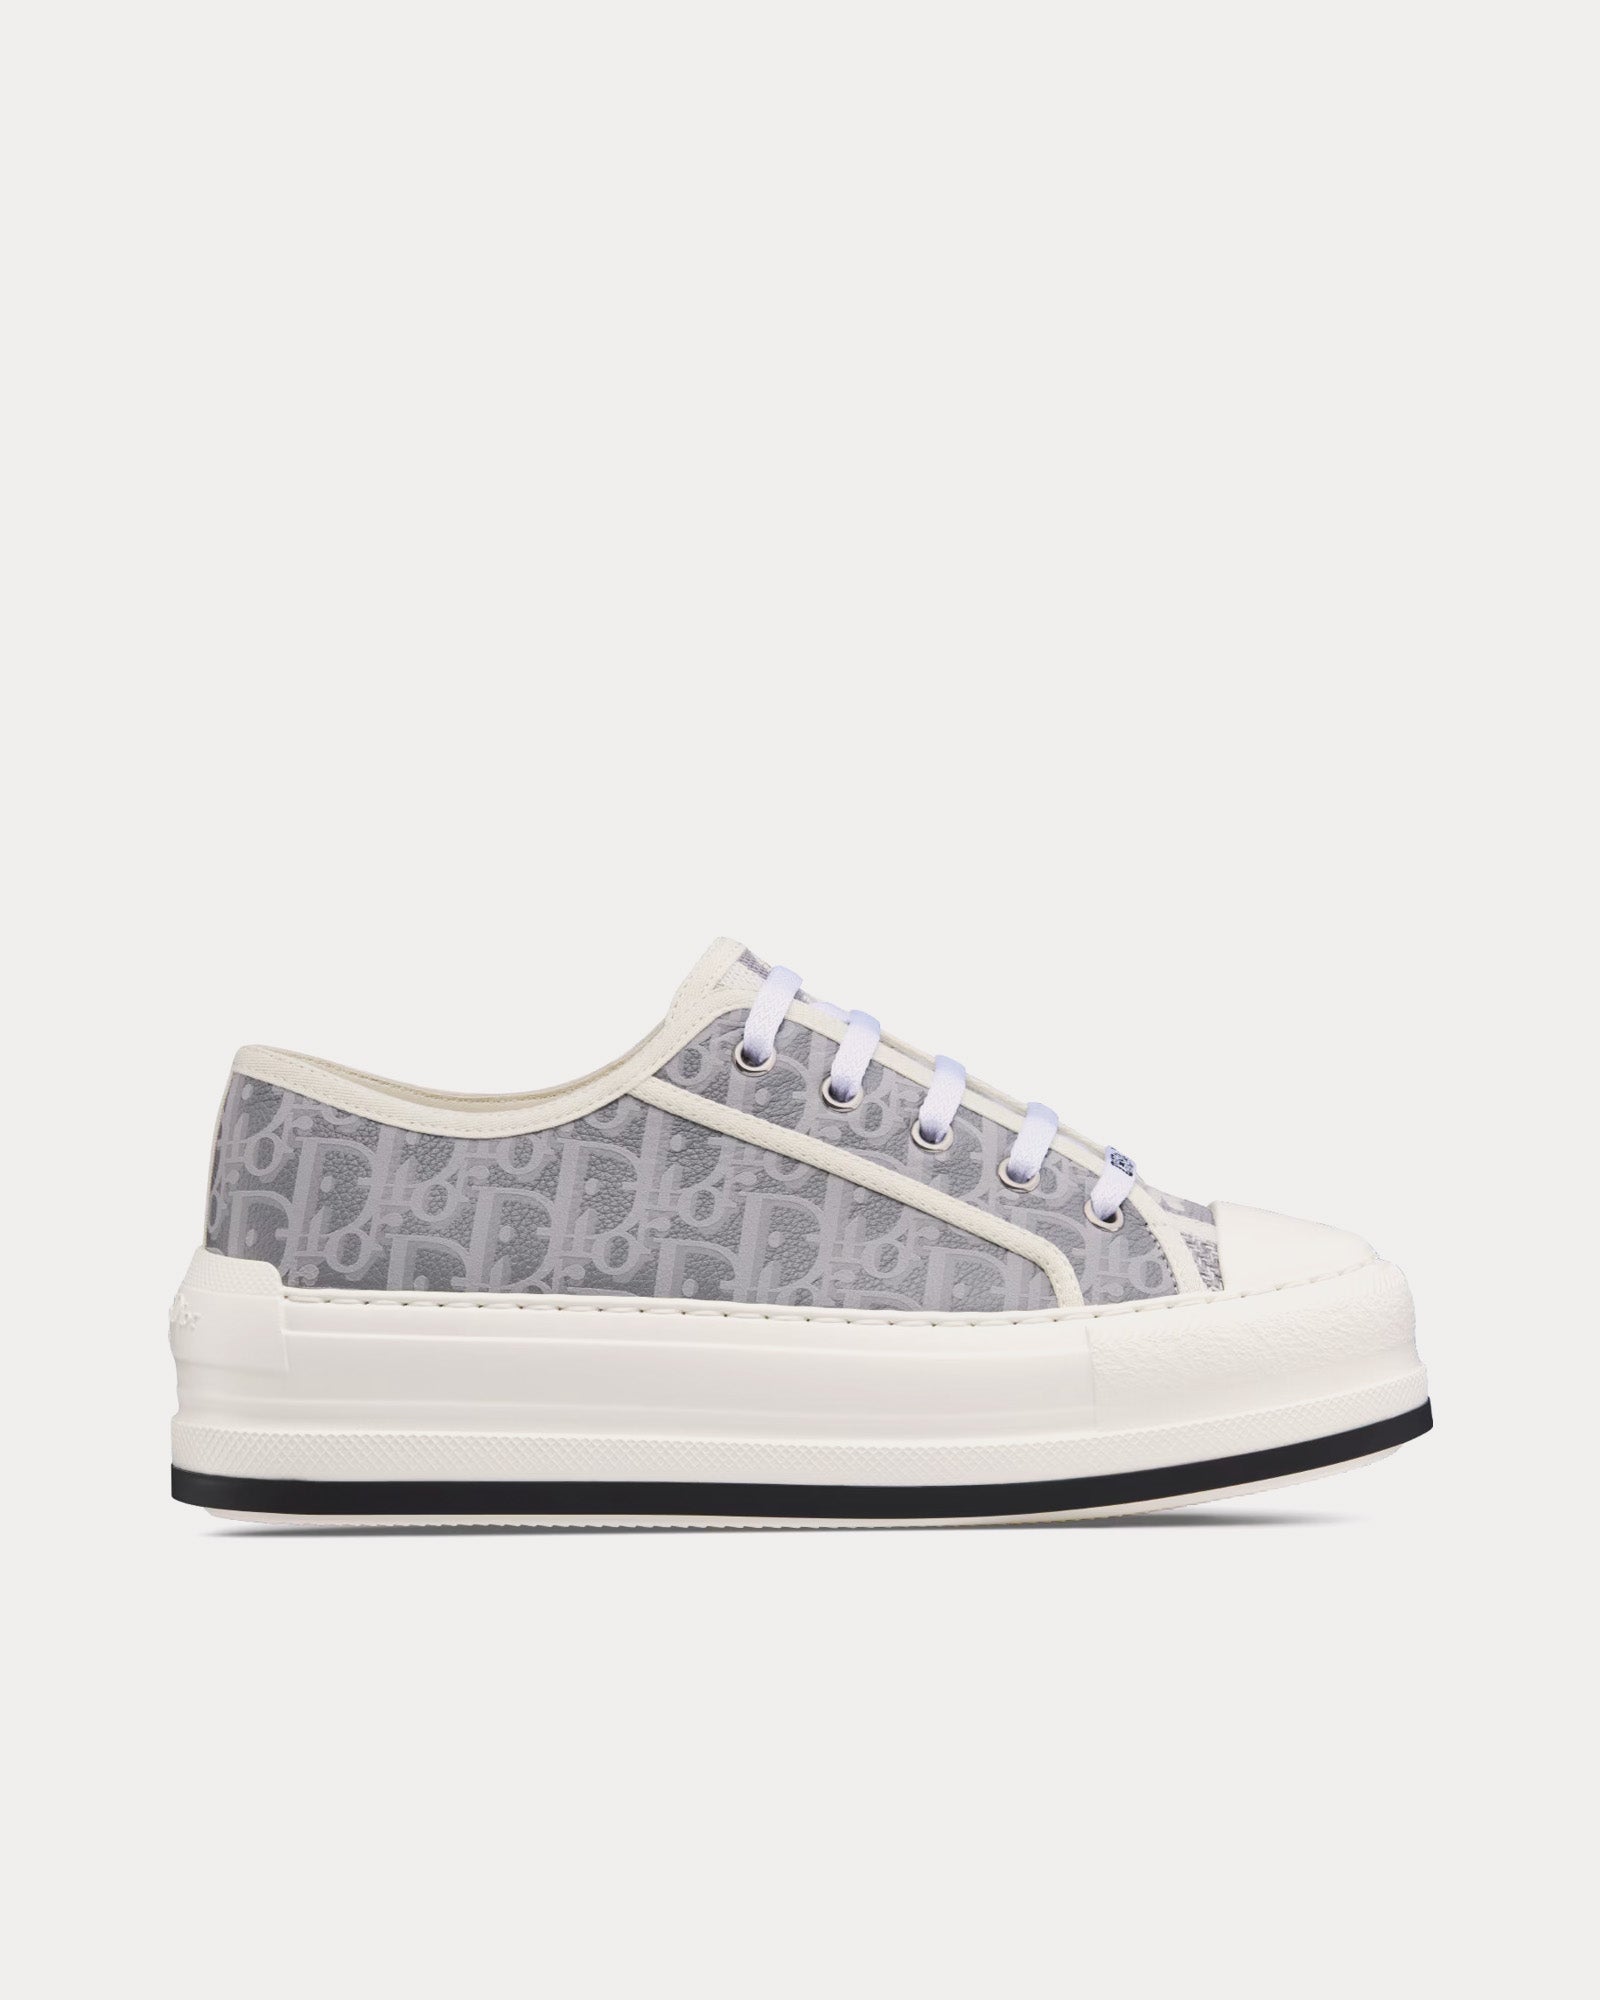 Dior - Walk'n'Dior Platform Gray Calfskin Textured with Dior Oblique Motif and Embroidered Cotton Low Top Sneakers